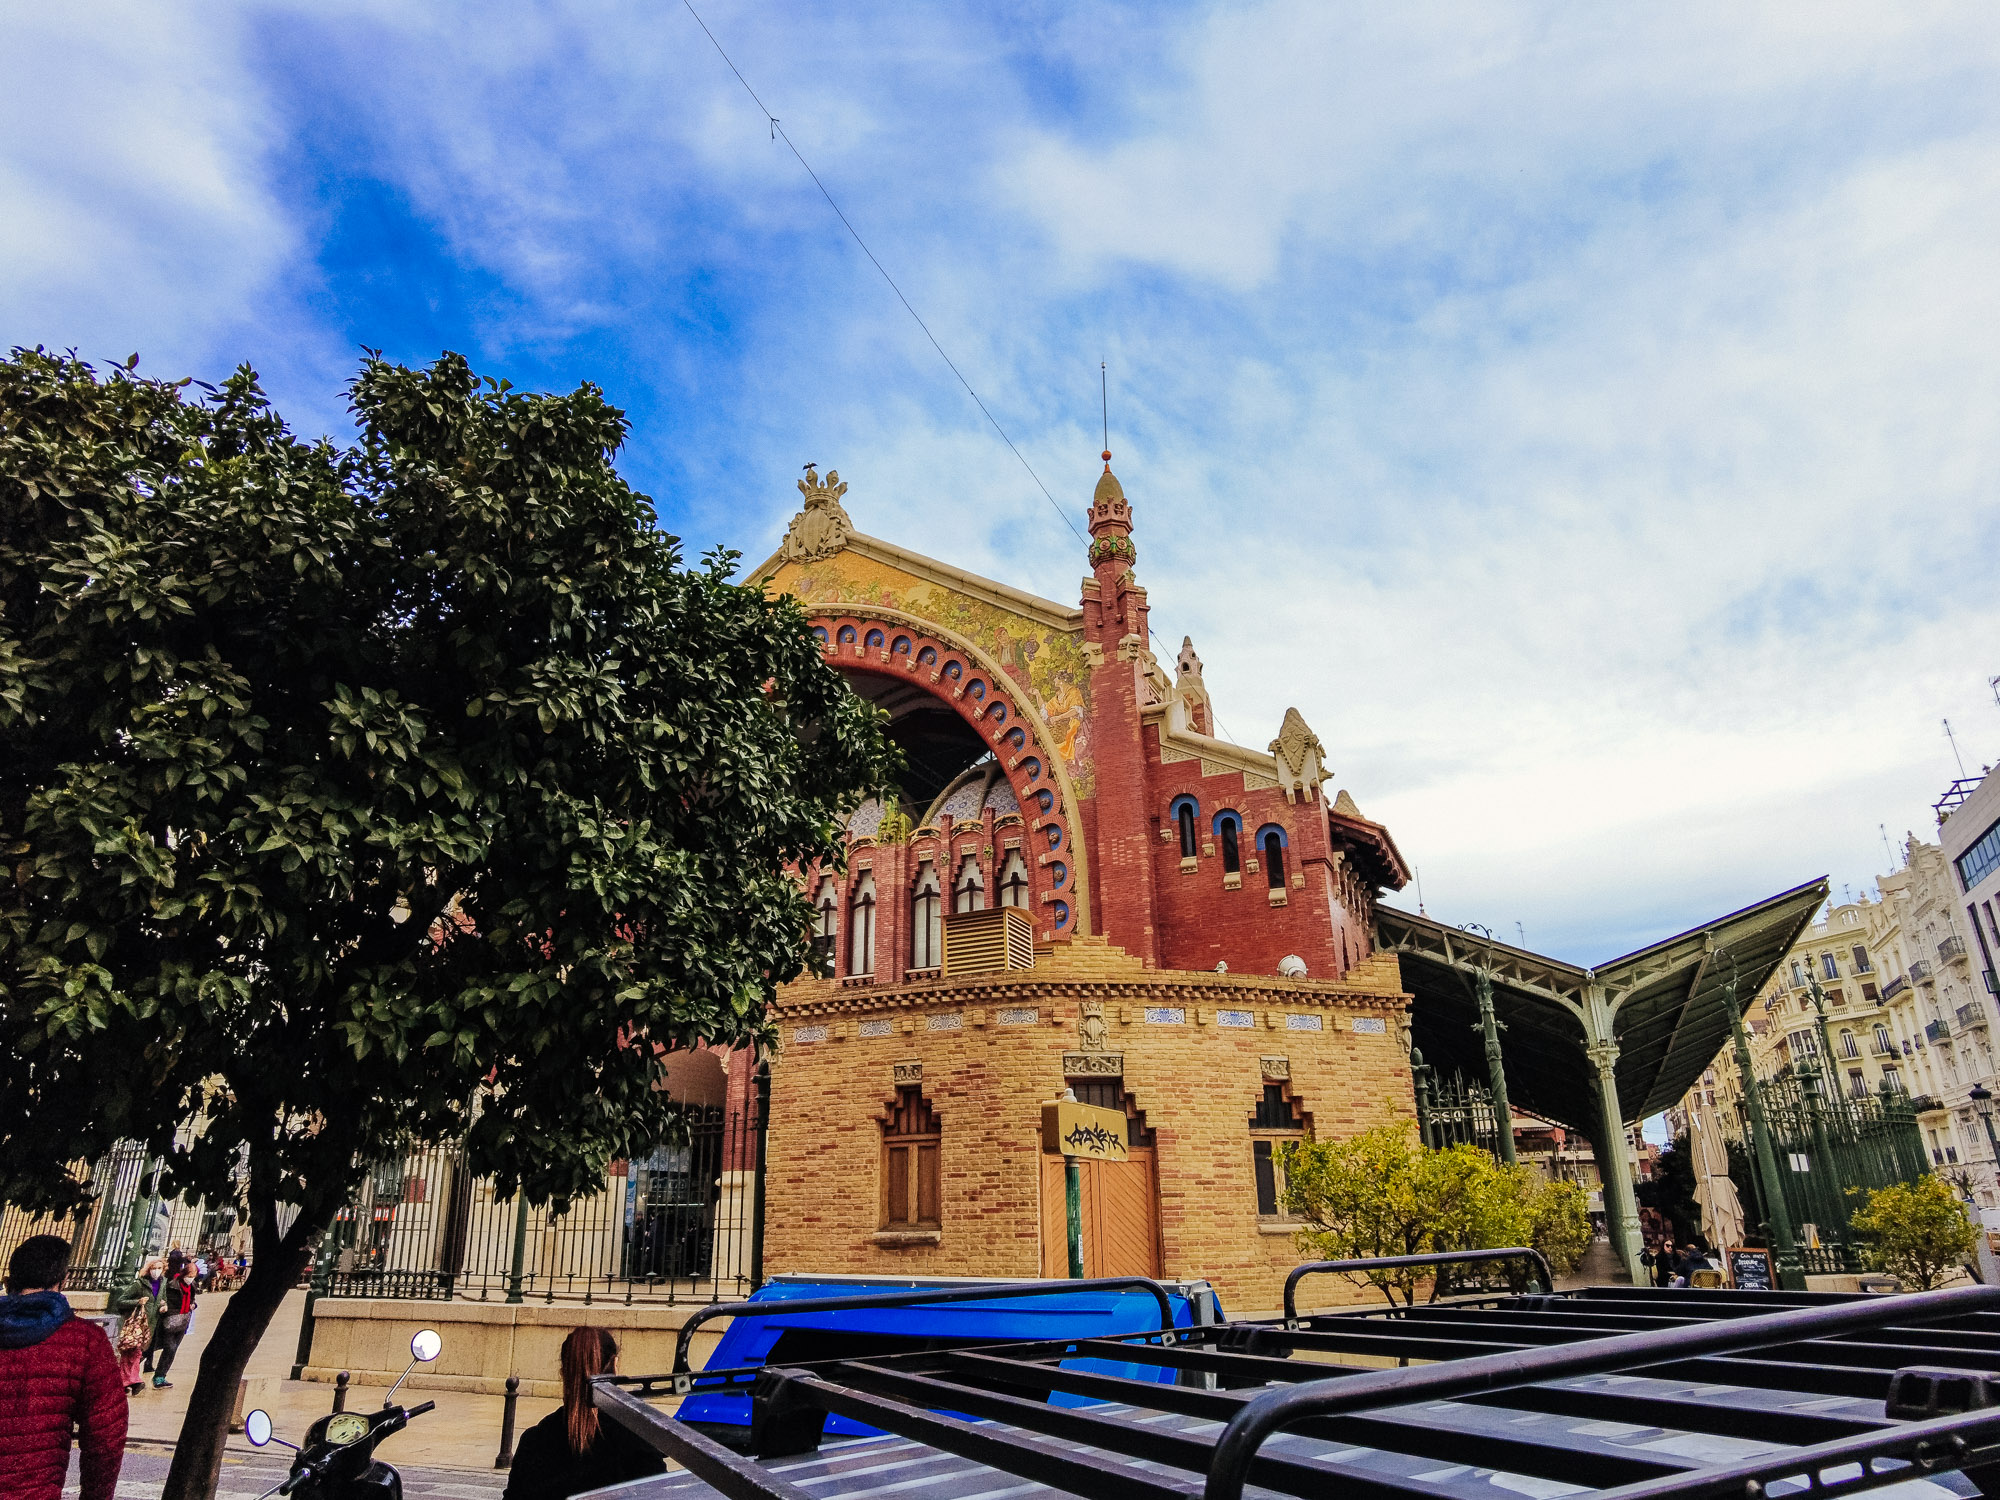 Lunch and visit at Mercat de Colon in Valencia, Spain - Best Things To Do - Jeff On The Road